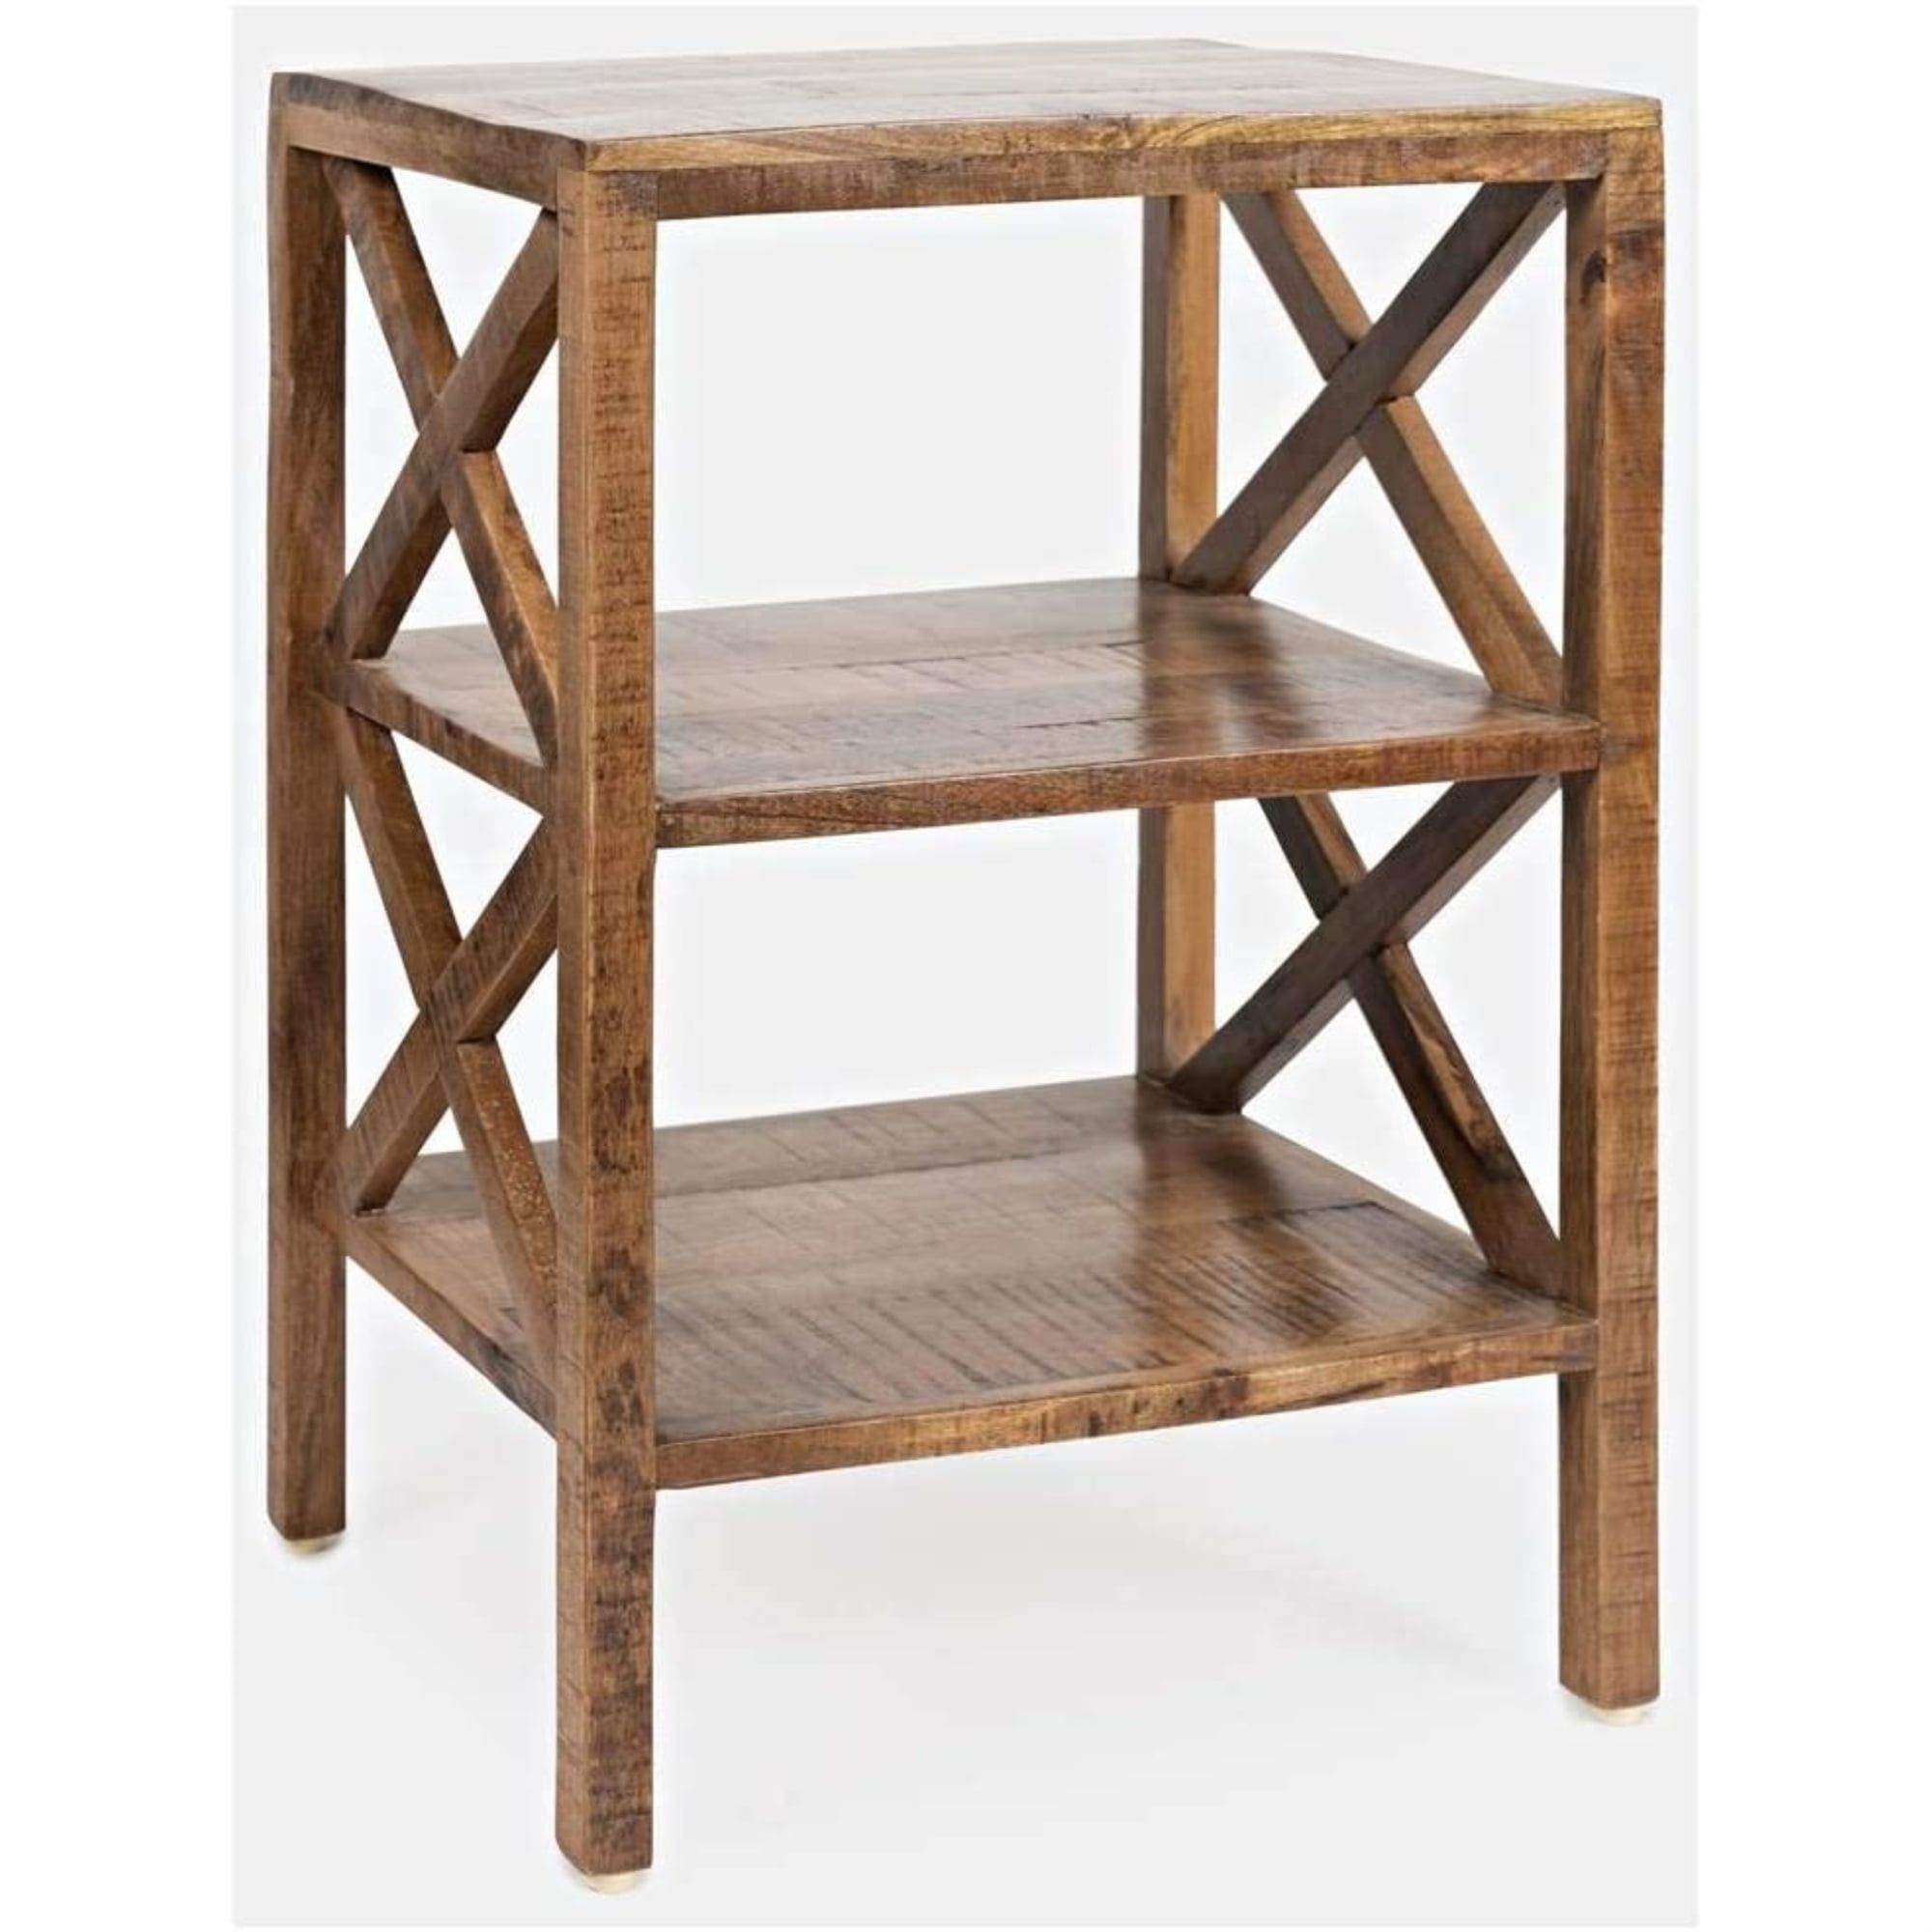 Transitional Beige Solid Wood Rectangular Side Table